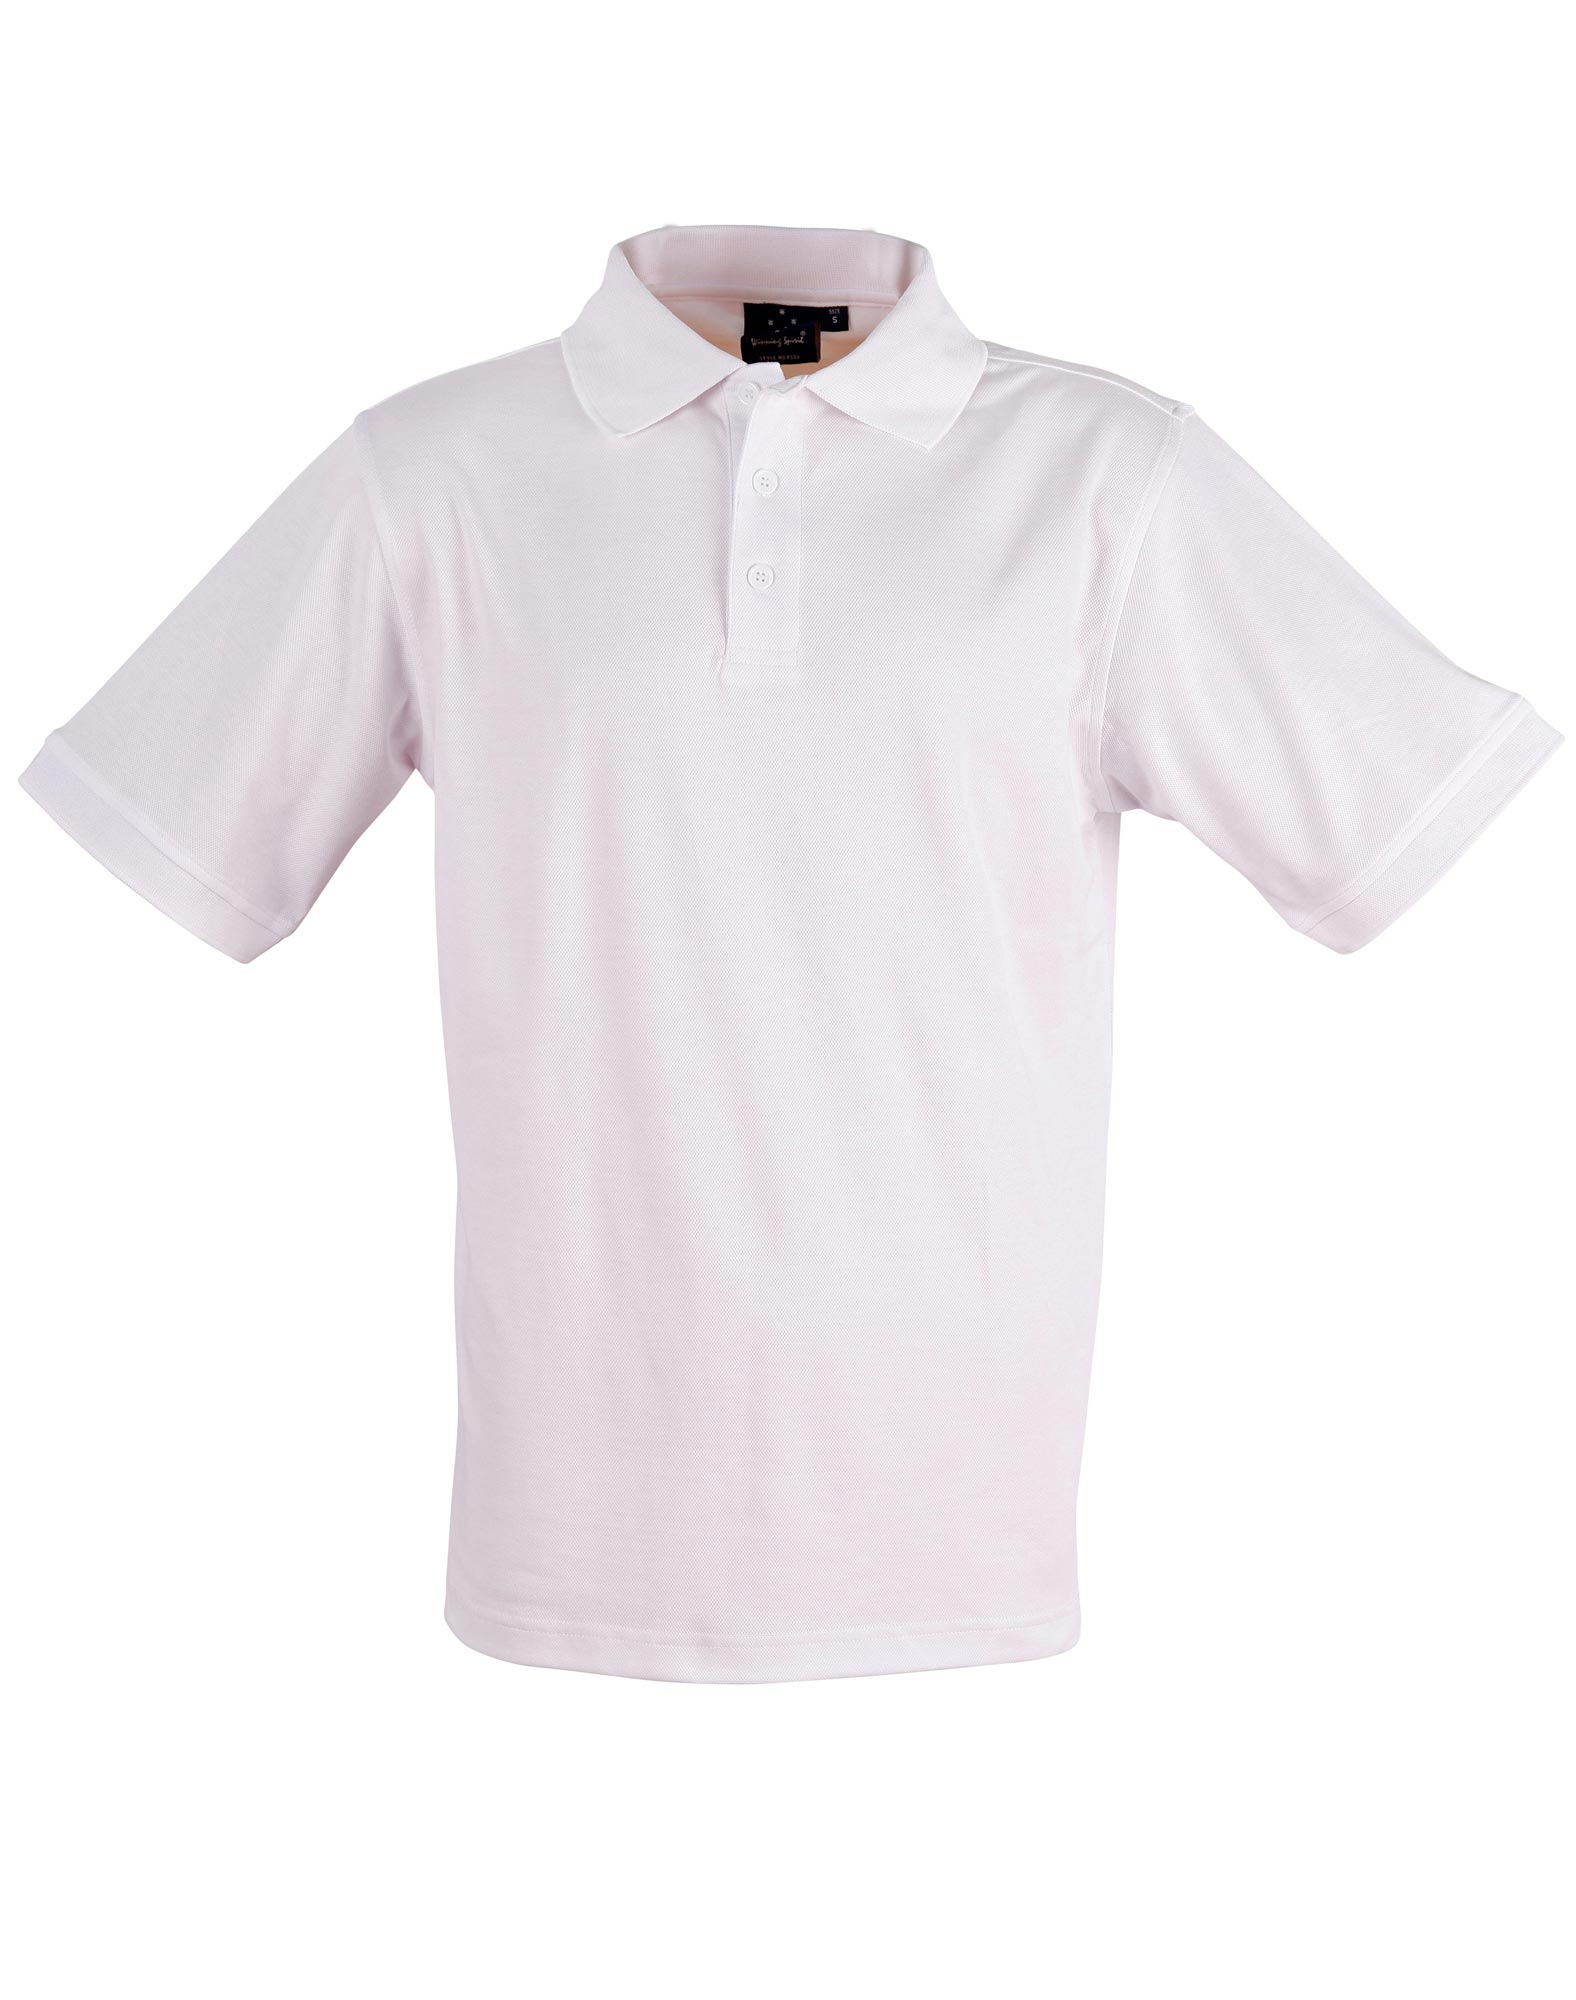 PS33/PS34b VICTORY POLO Men’s&Ladies’